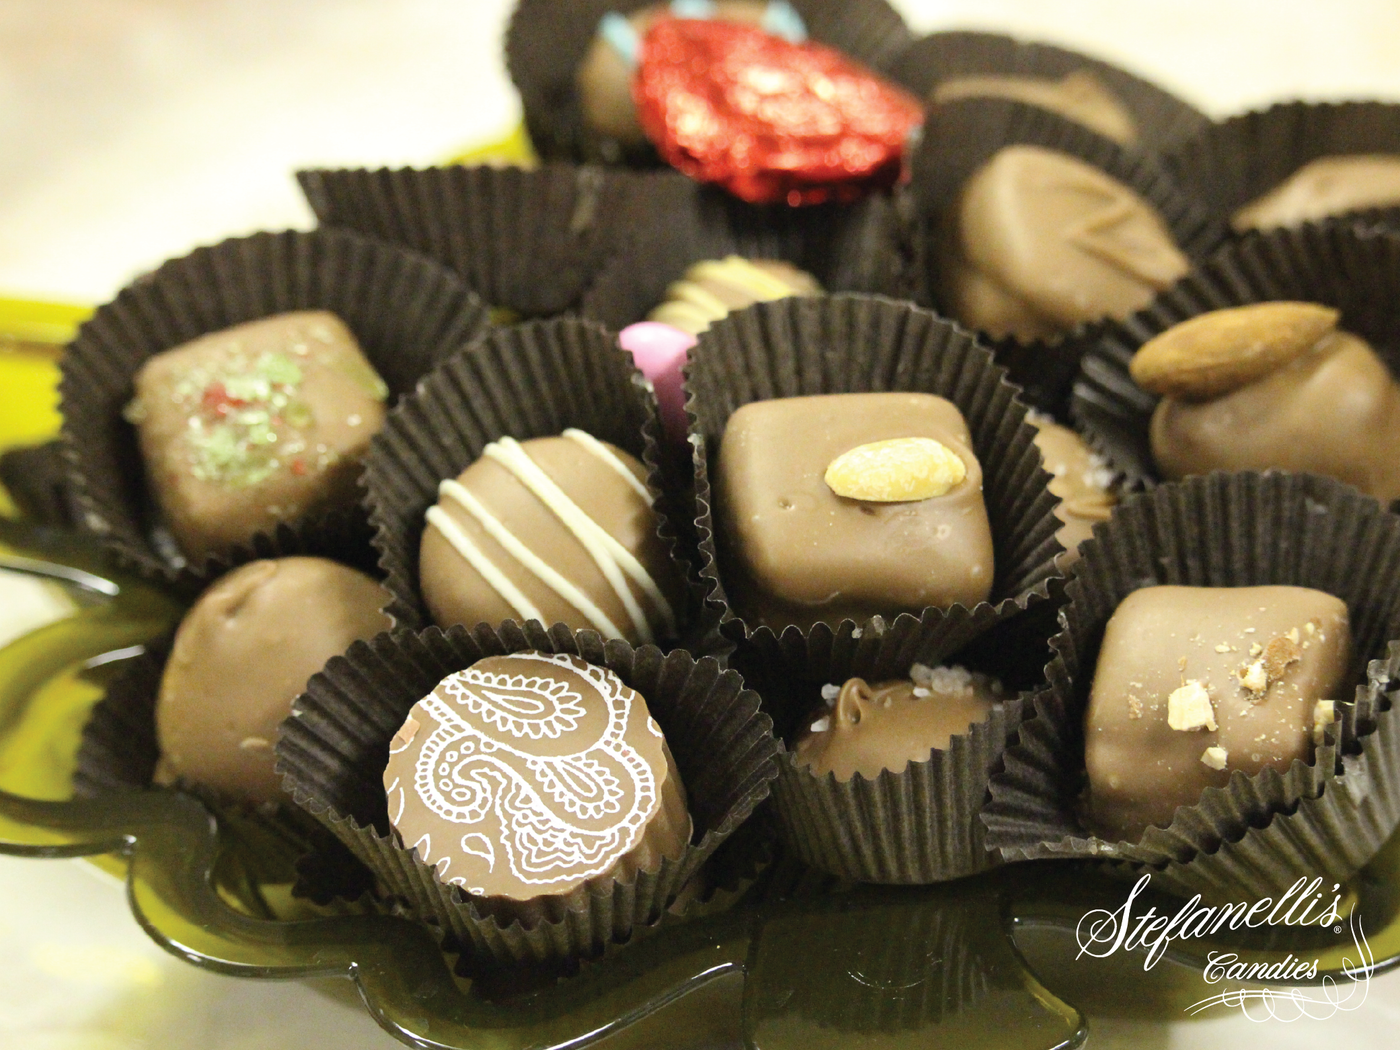 Stefanelli’s Candy: Perfect for Any Gift